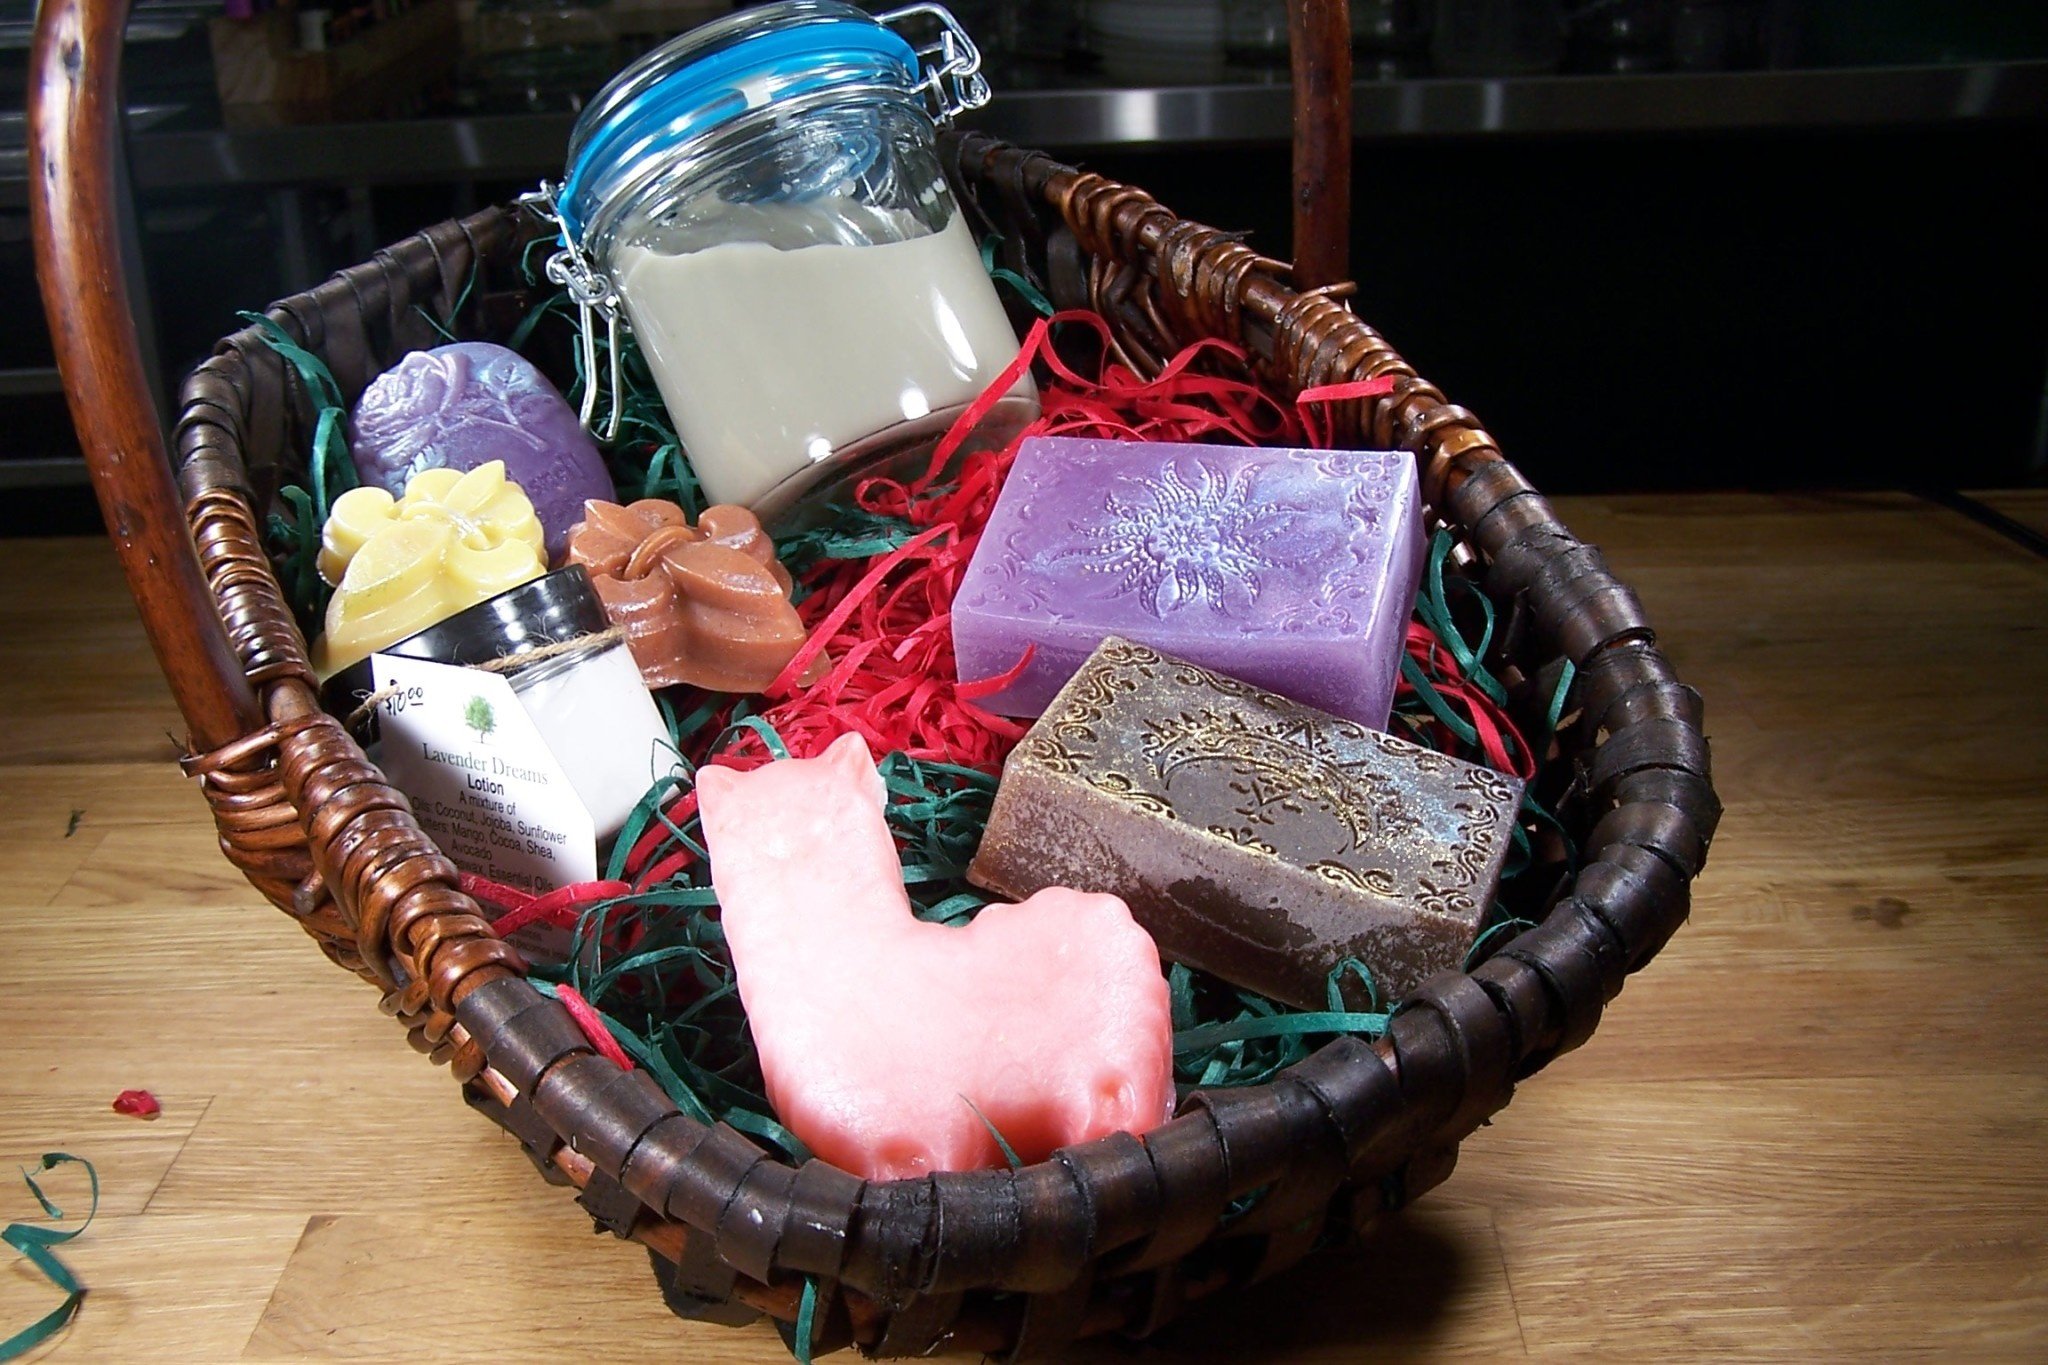 Gift Basket- Deluxe Combo: 3 Bath/Novelty Bars, 3 Guest Soaps, Miracle Mud, & Body Cream